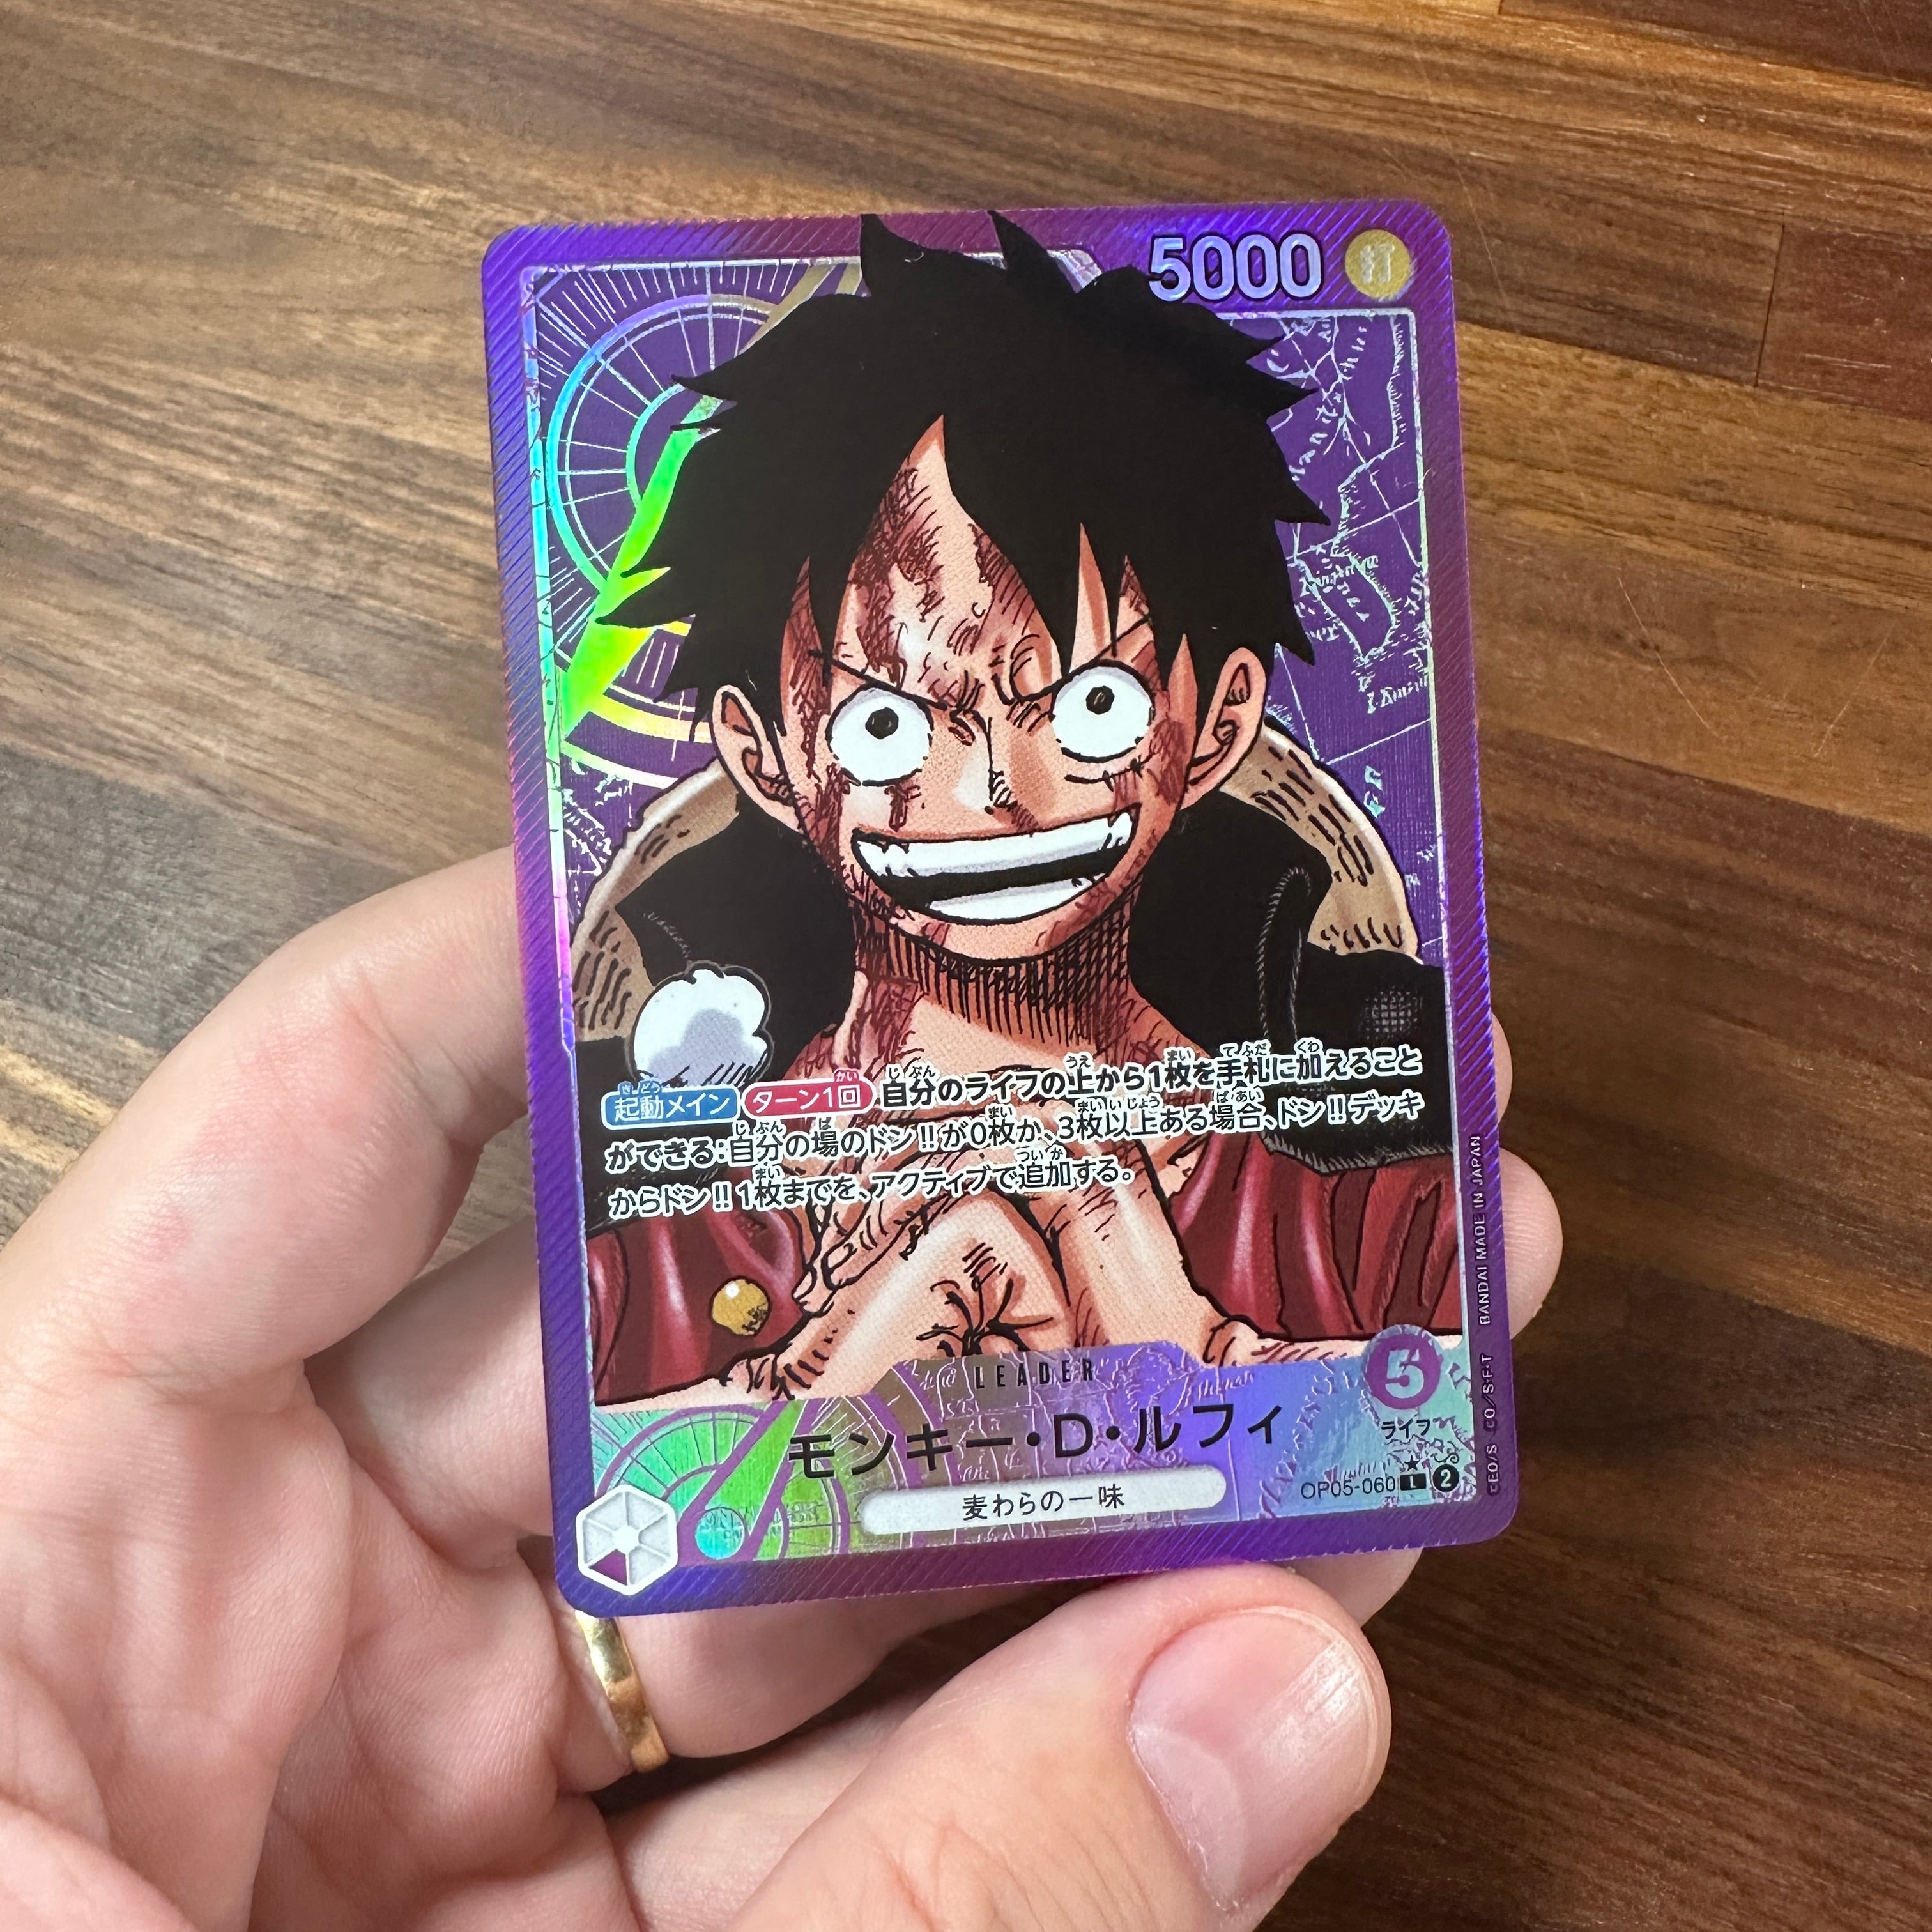 GEAR 5 LUFFY IN OPTCG! #onepiececardgame #onepiece #optcg 